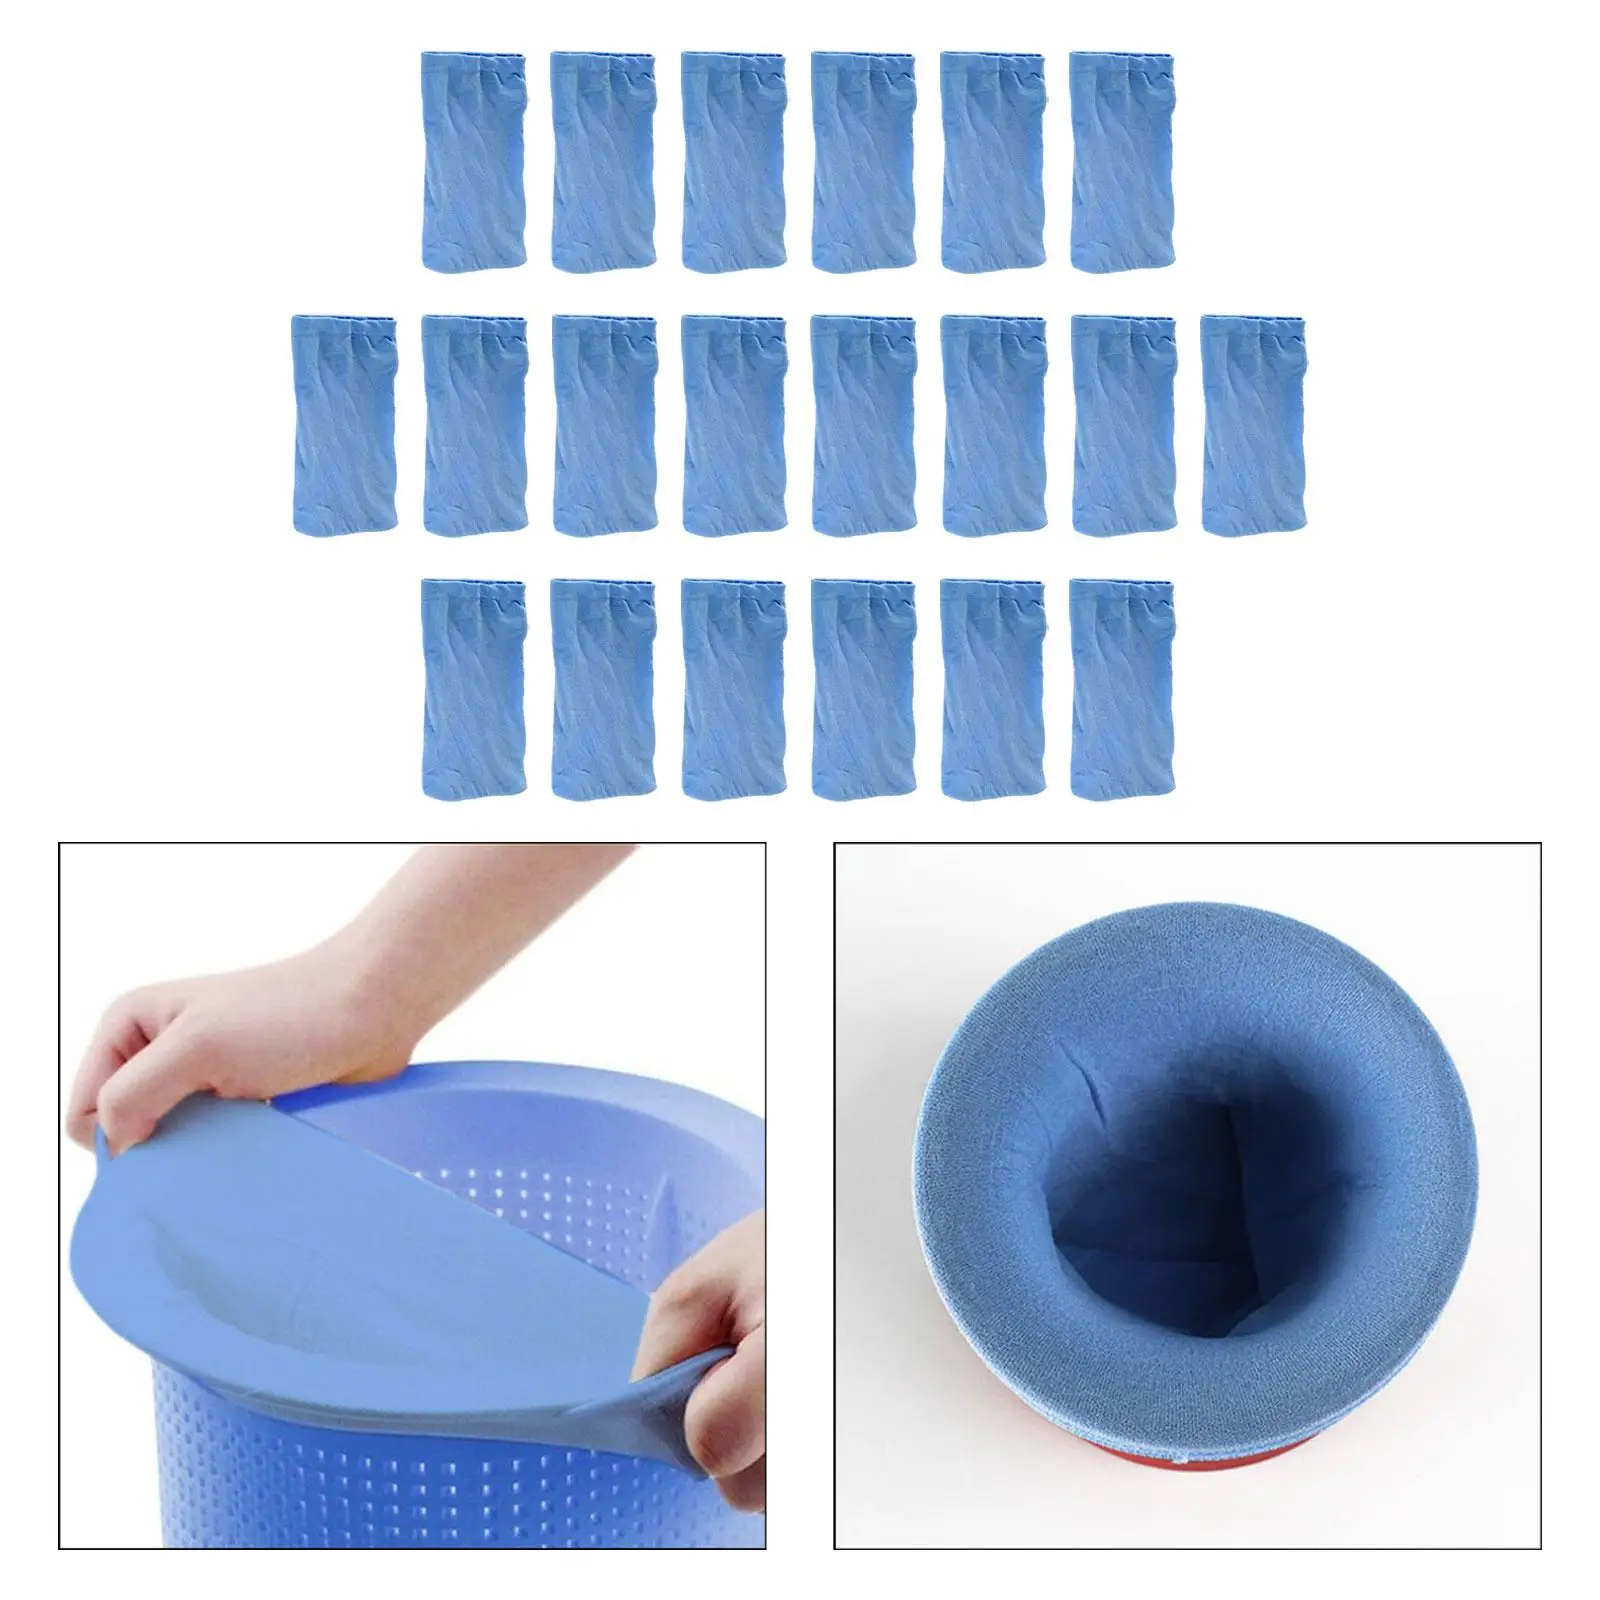 20x Storage Pool Skimmer Socks Swimming Pool Filter for in Ground and above Ground Pools Baskets Basket Swimming Pool Filters